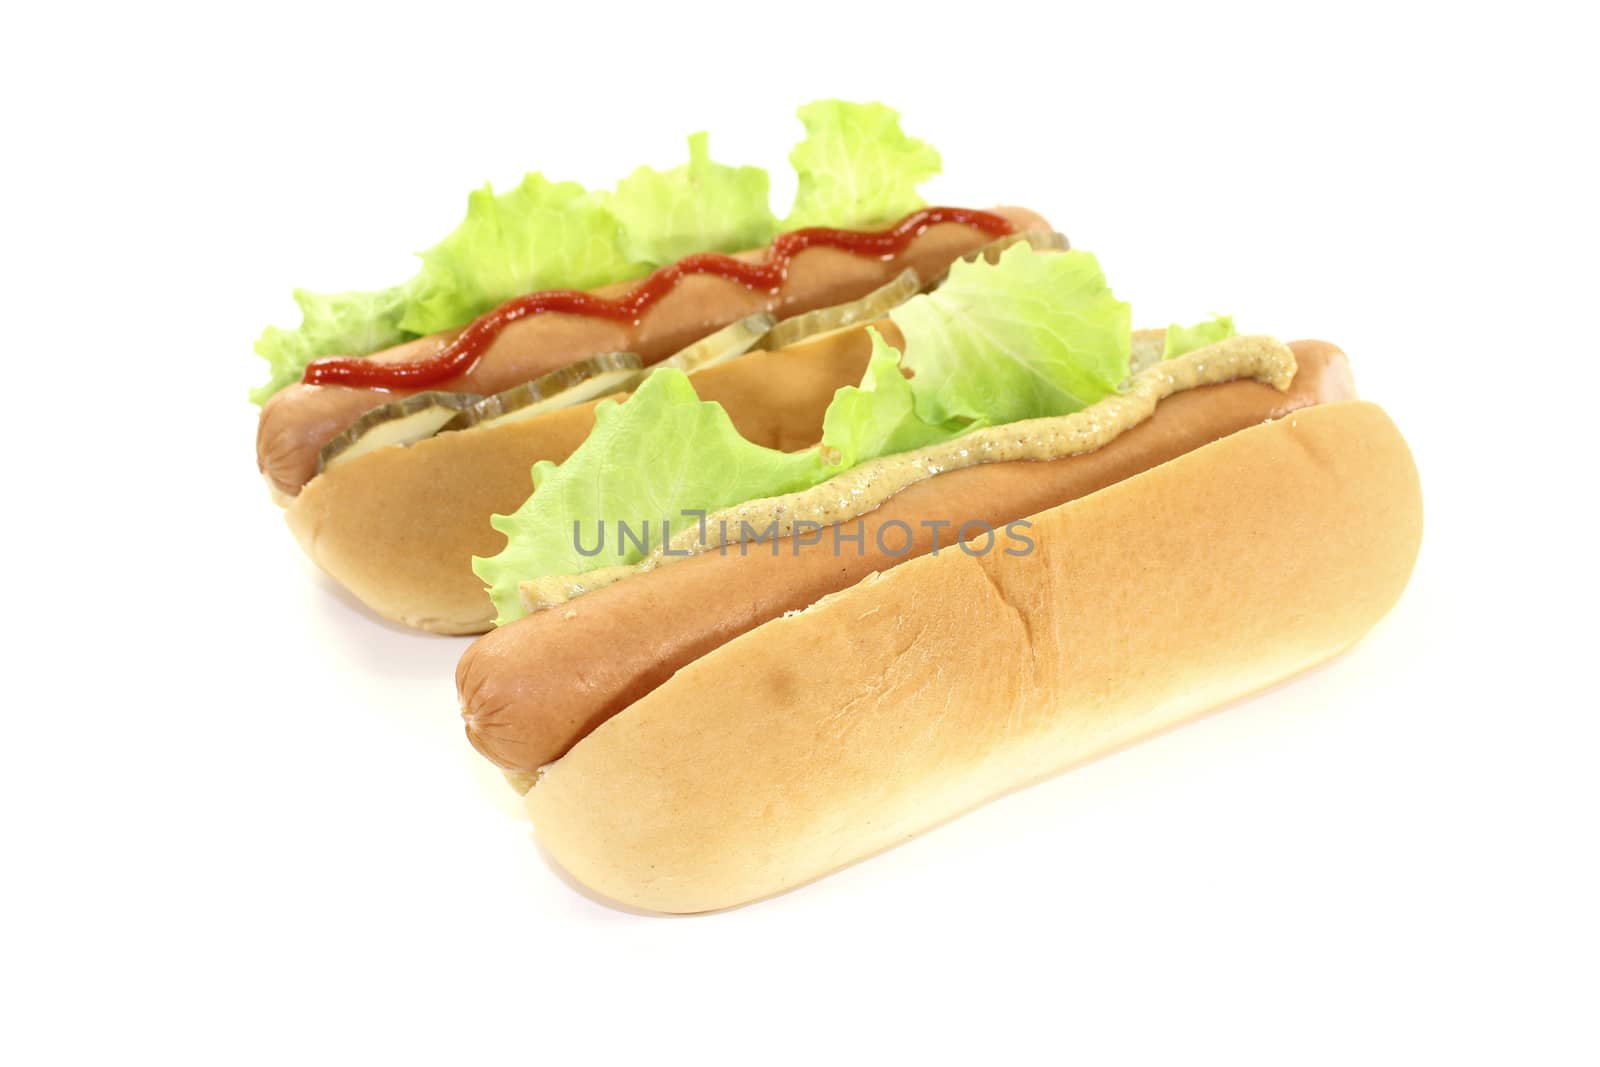 Hot dog with mustard and ketchup by discovery